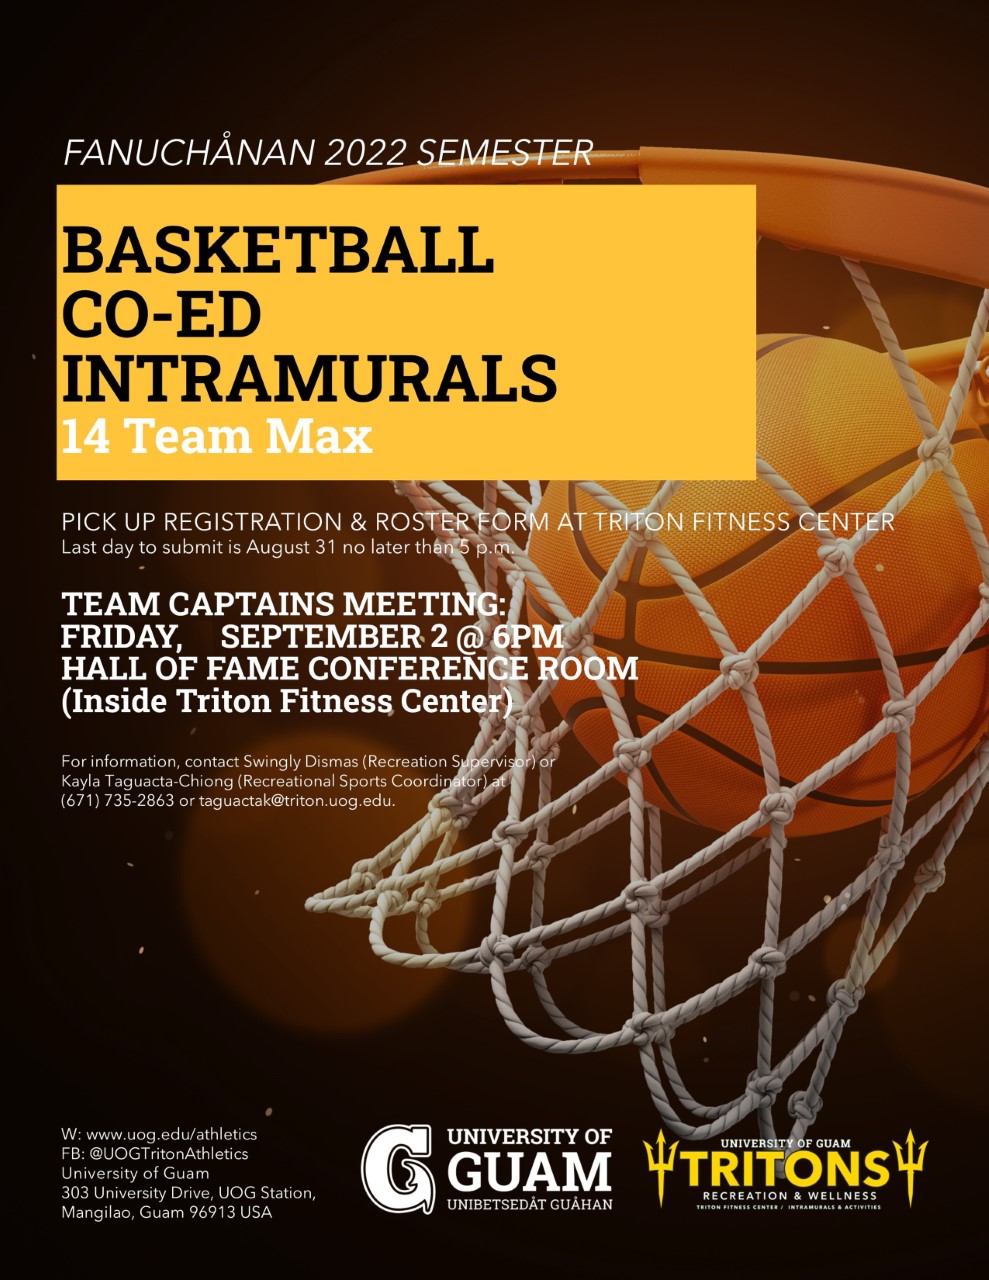 Deadline to Register a Team for Triton Recreation Co-Ed Basketball Intramurals